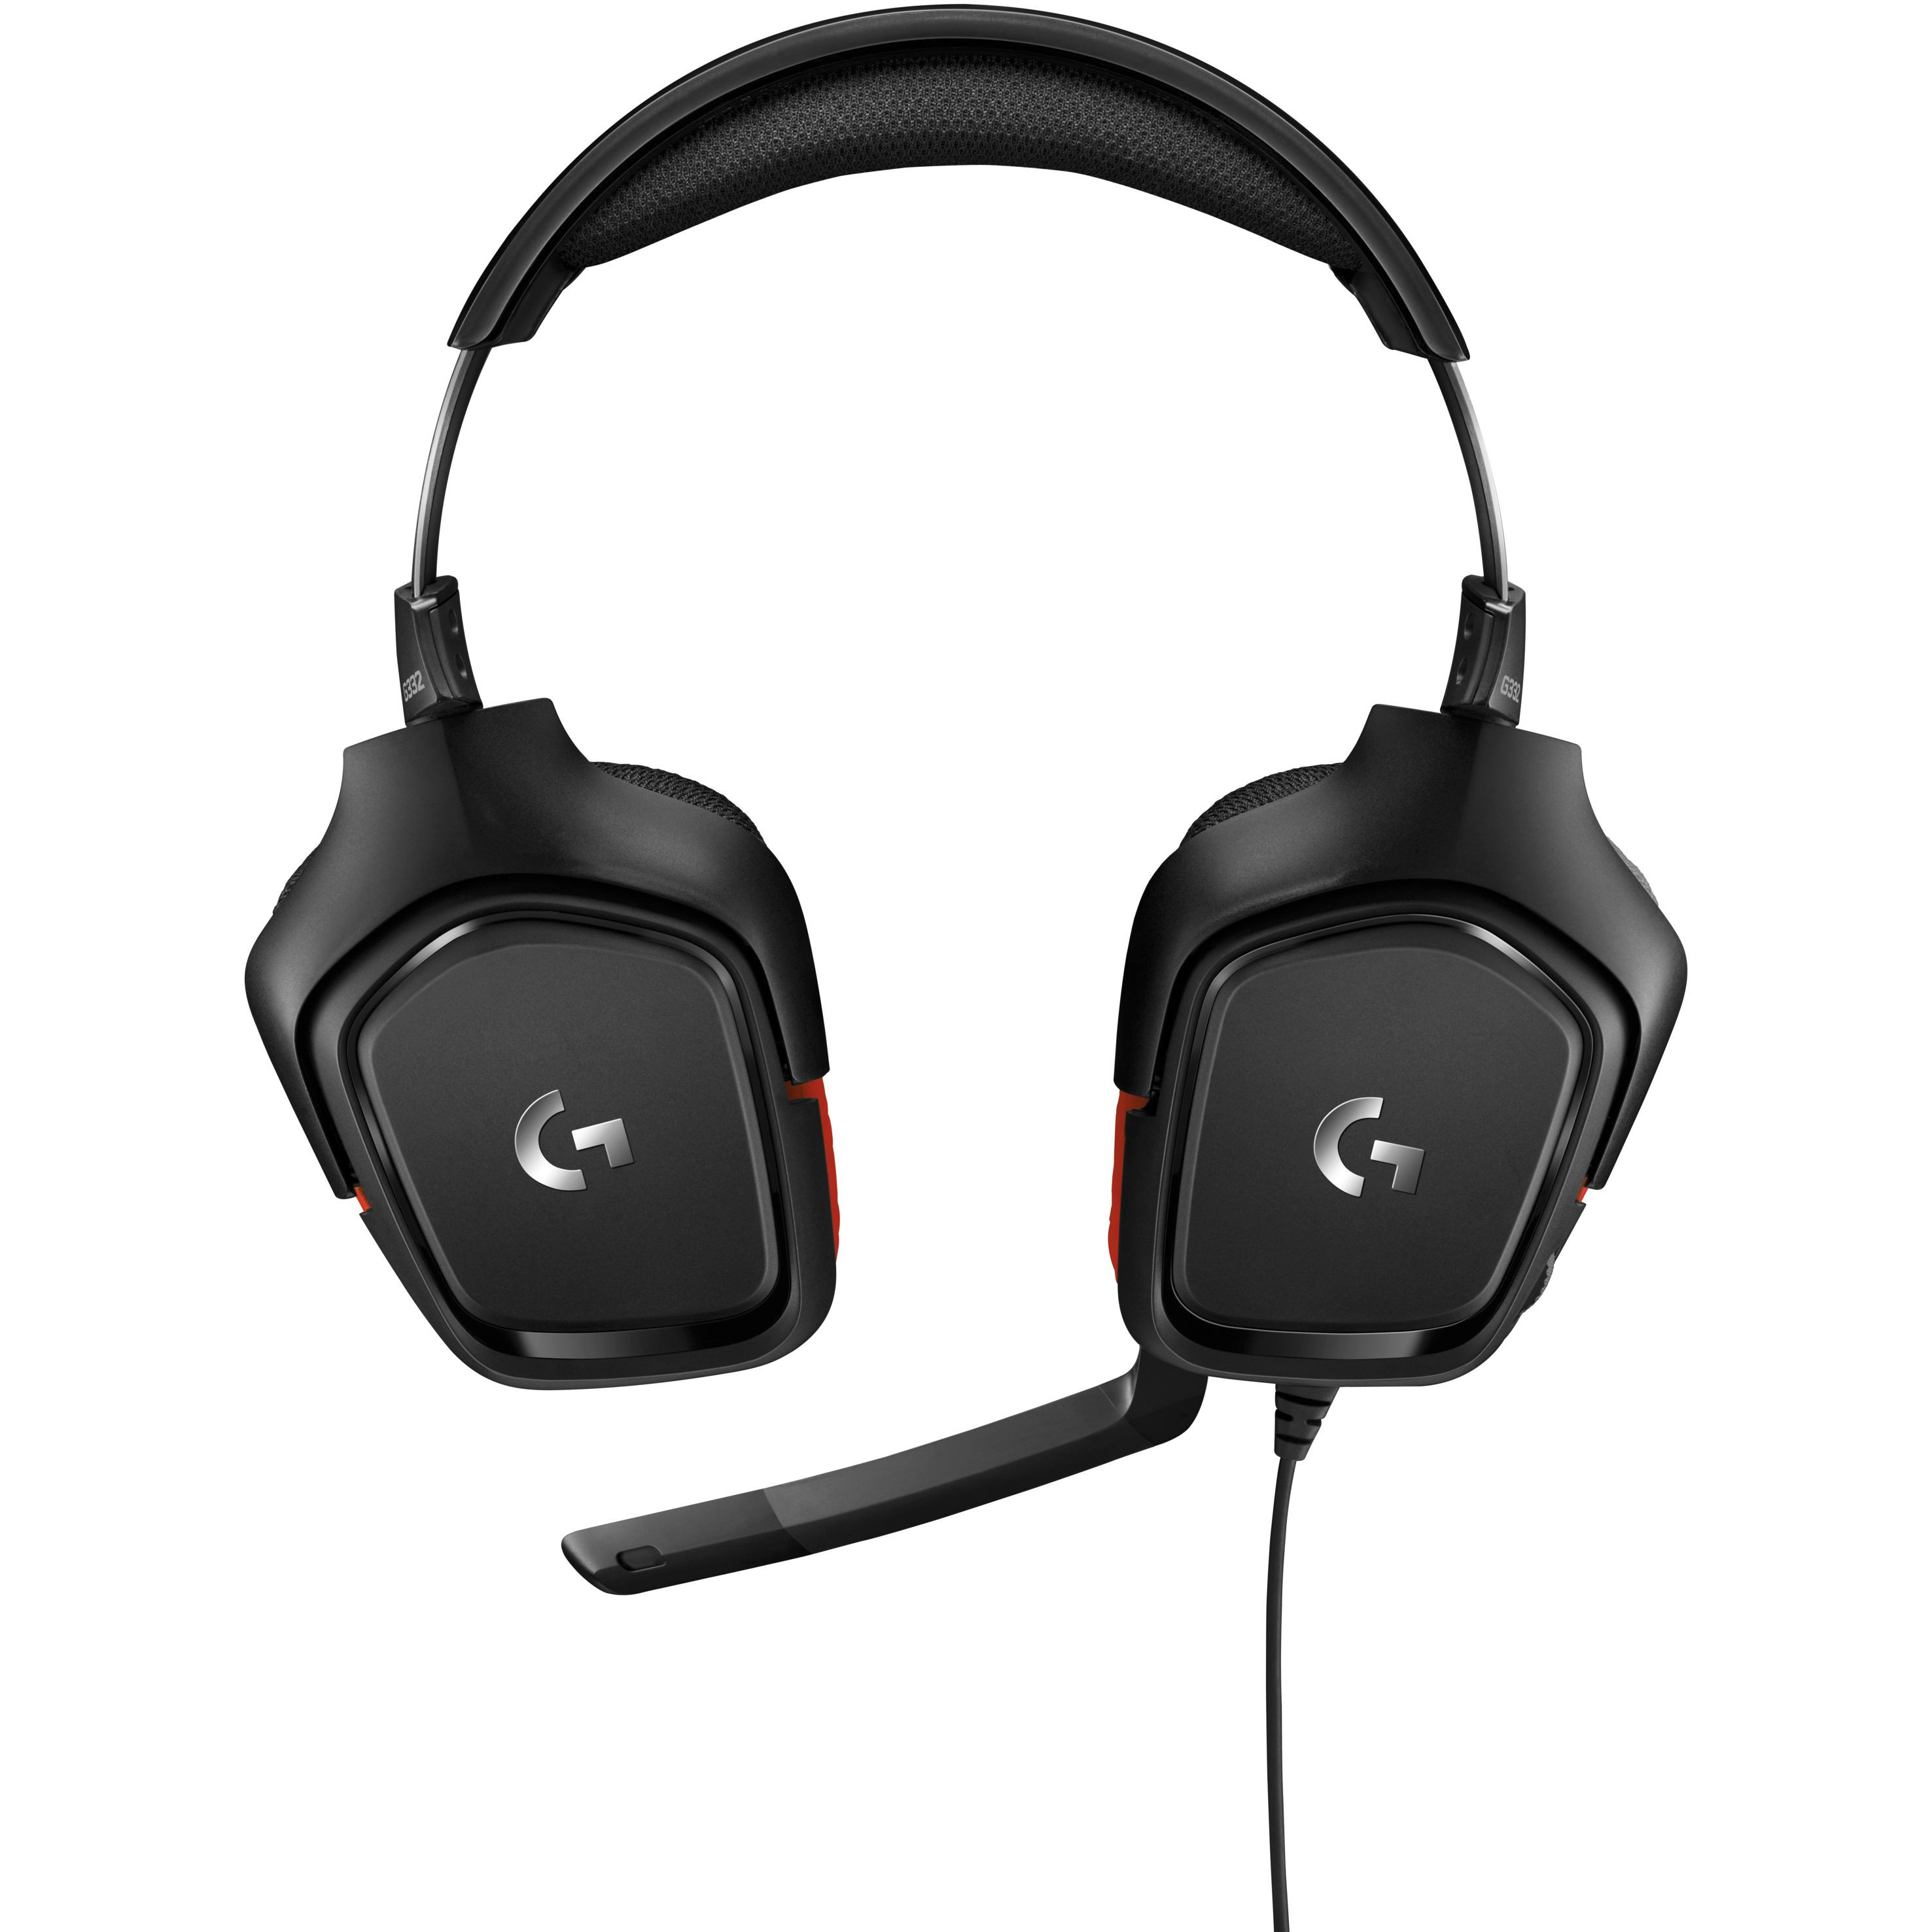 Logitech G332 Wired Gaming Headset, Rotating Leatherette Ear Cups, 3.5 mm Audio Jack, Flip-to-Mute Mic, Lightweight for PC,Xbox One,Xbox Series X|S,PS5,PS4,Nintendo Switch, Black - image 3 of 5